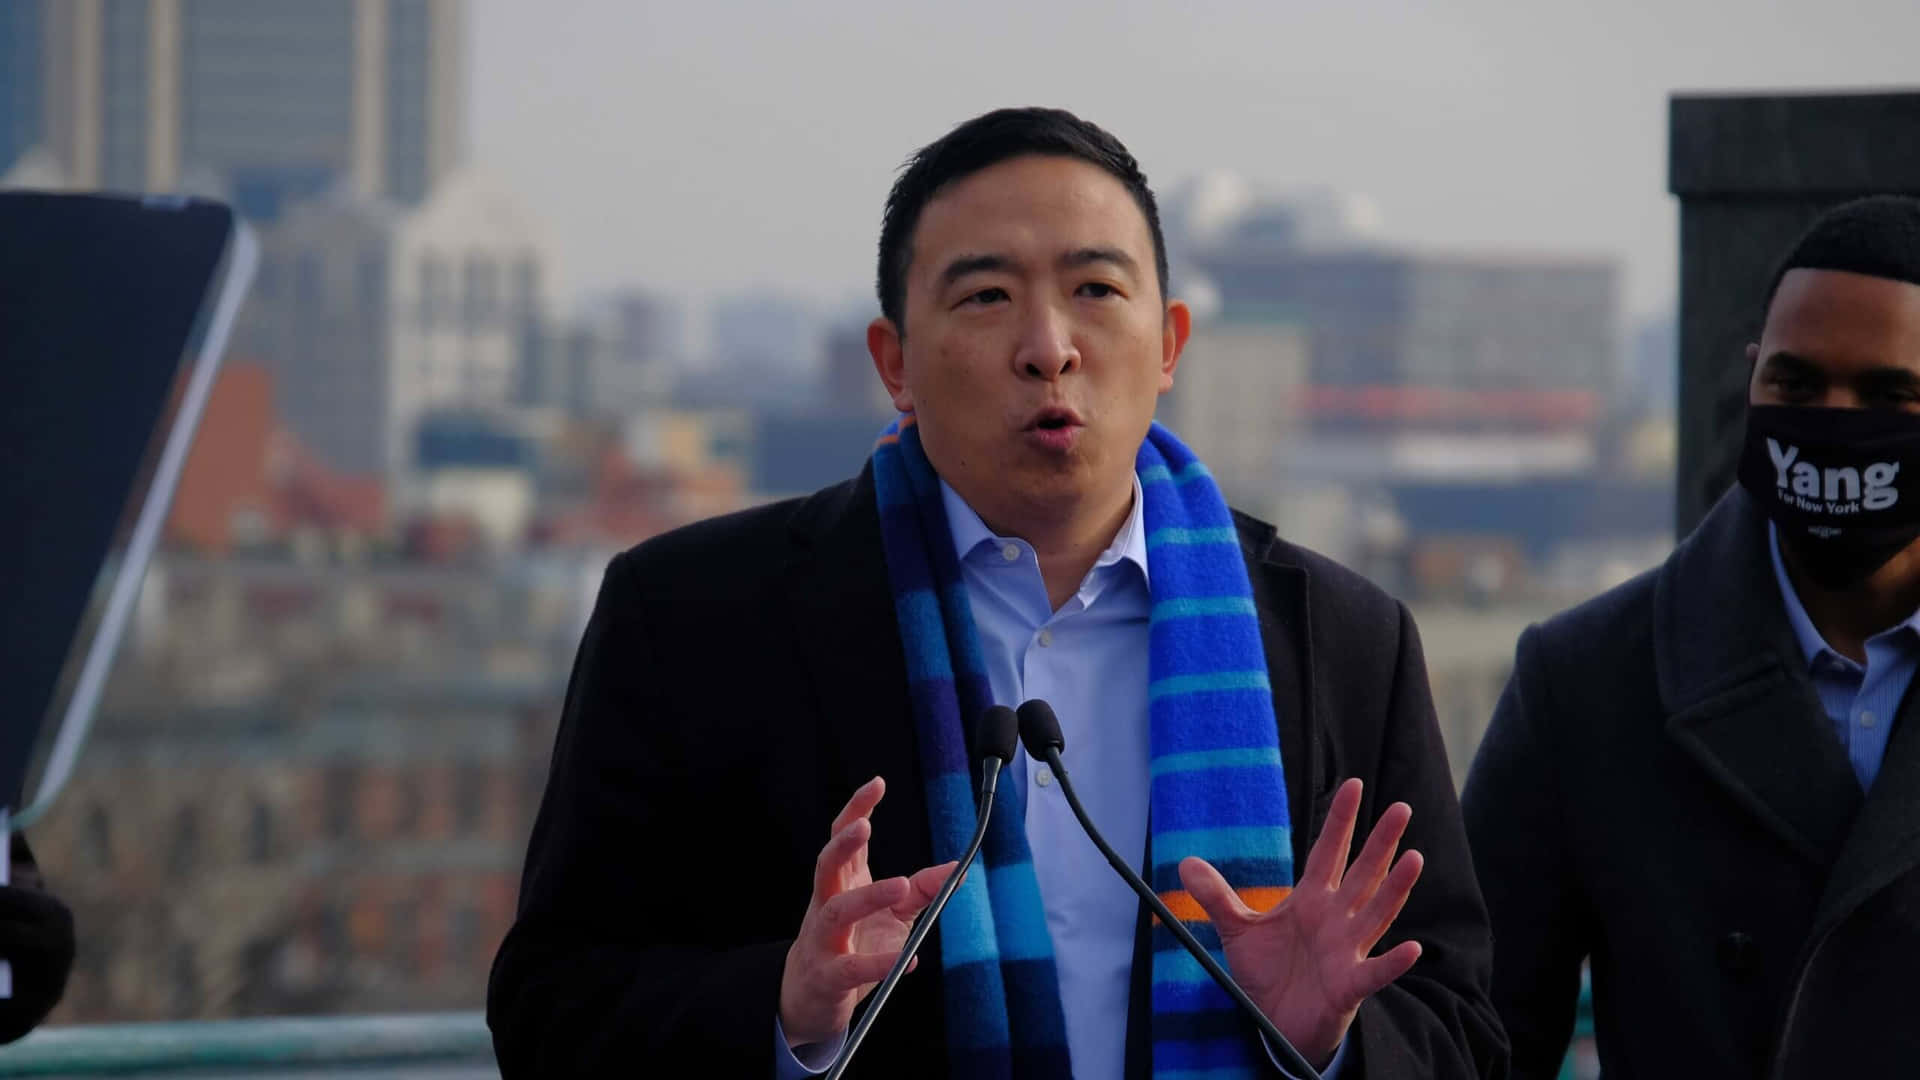 Andrew Yang On Stage Wallpaper